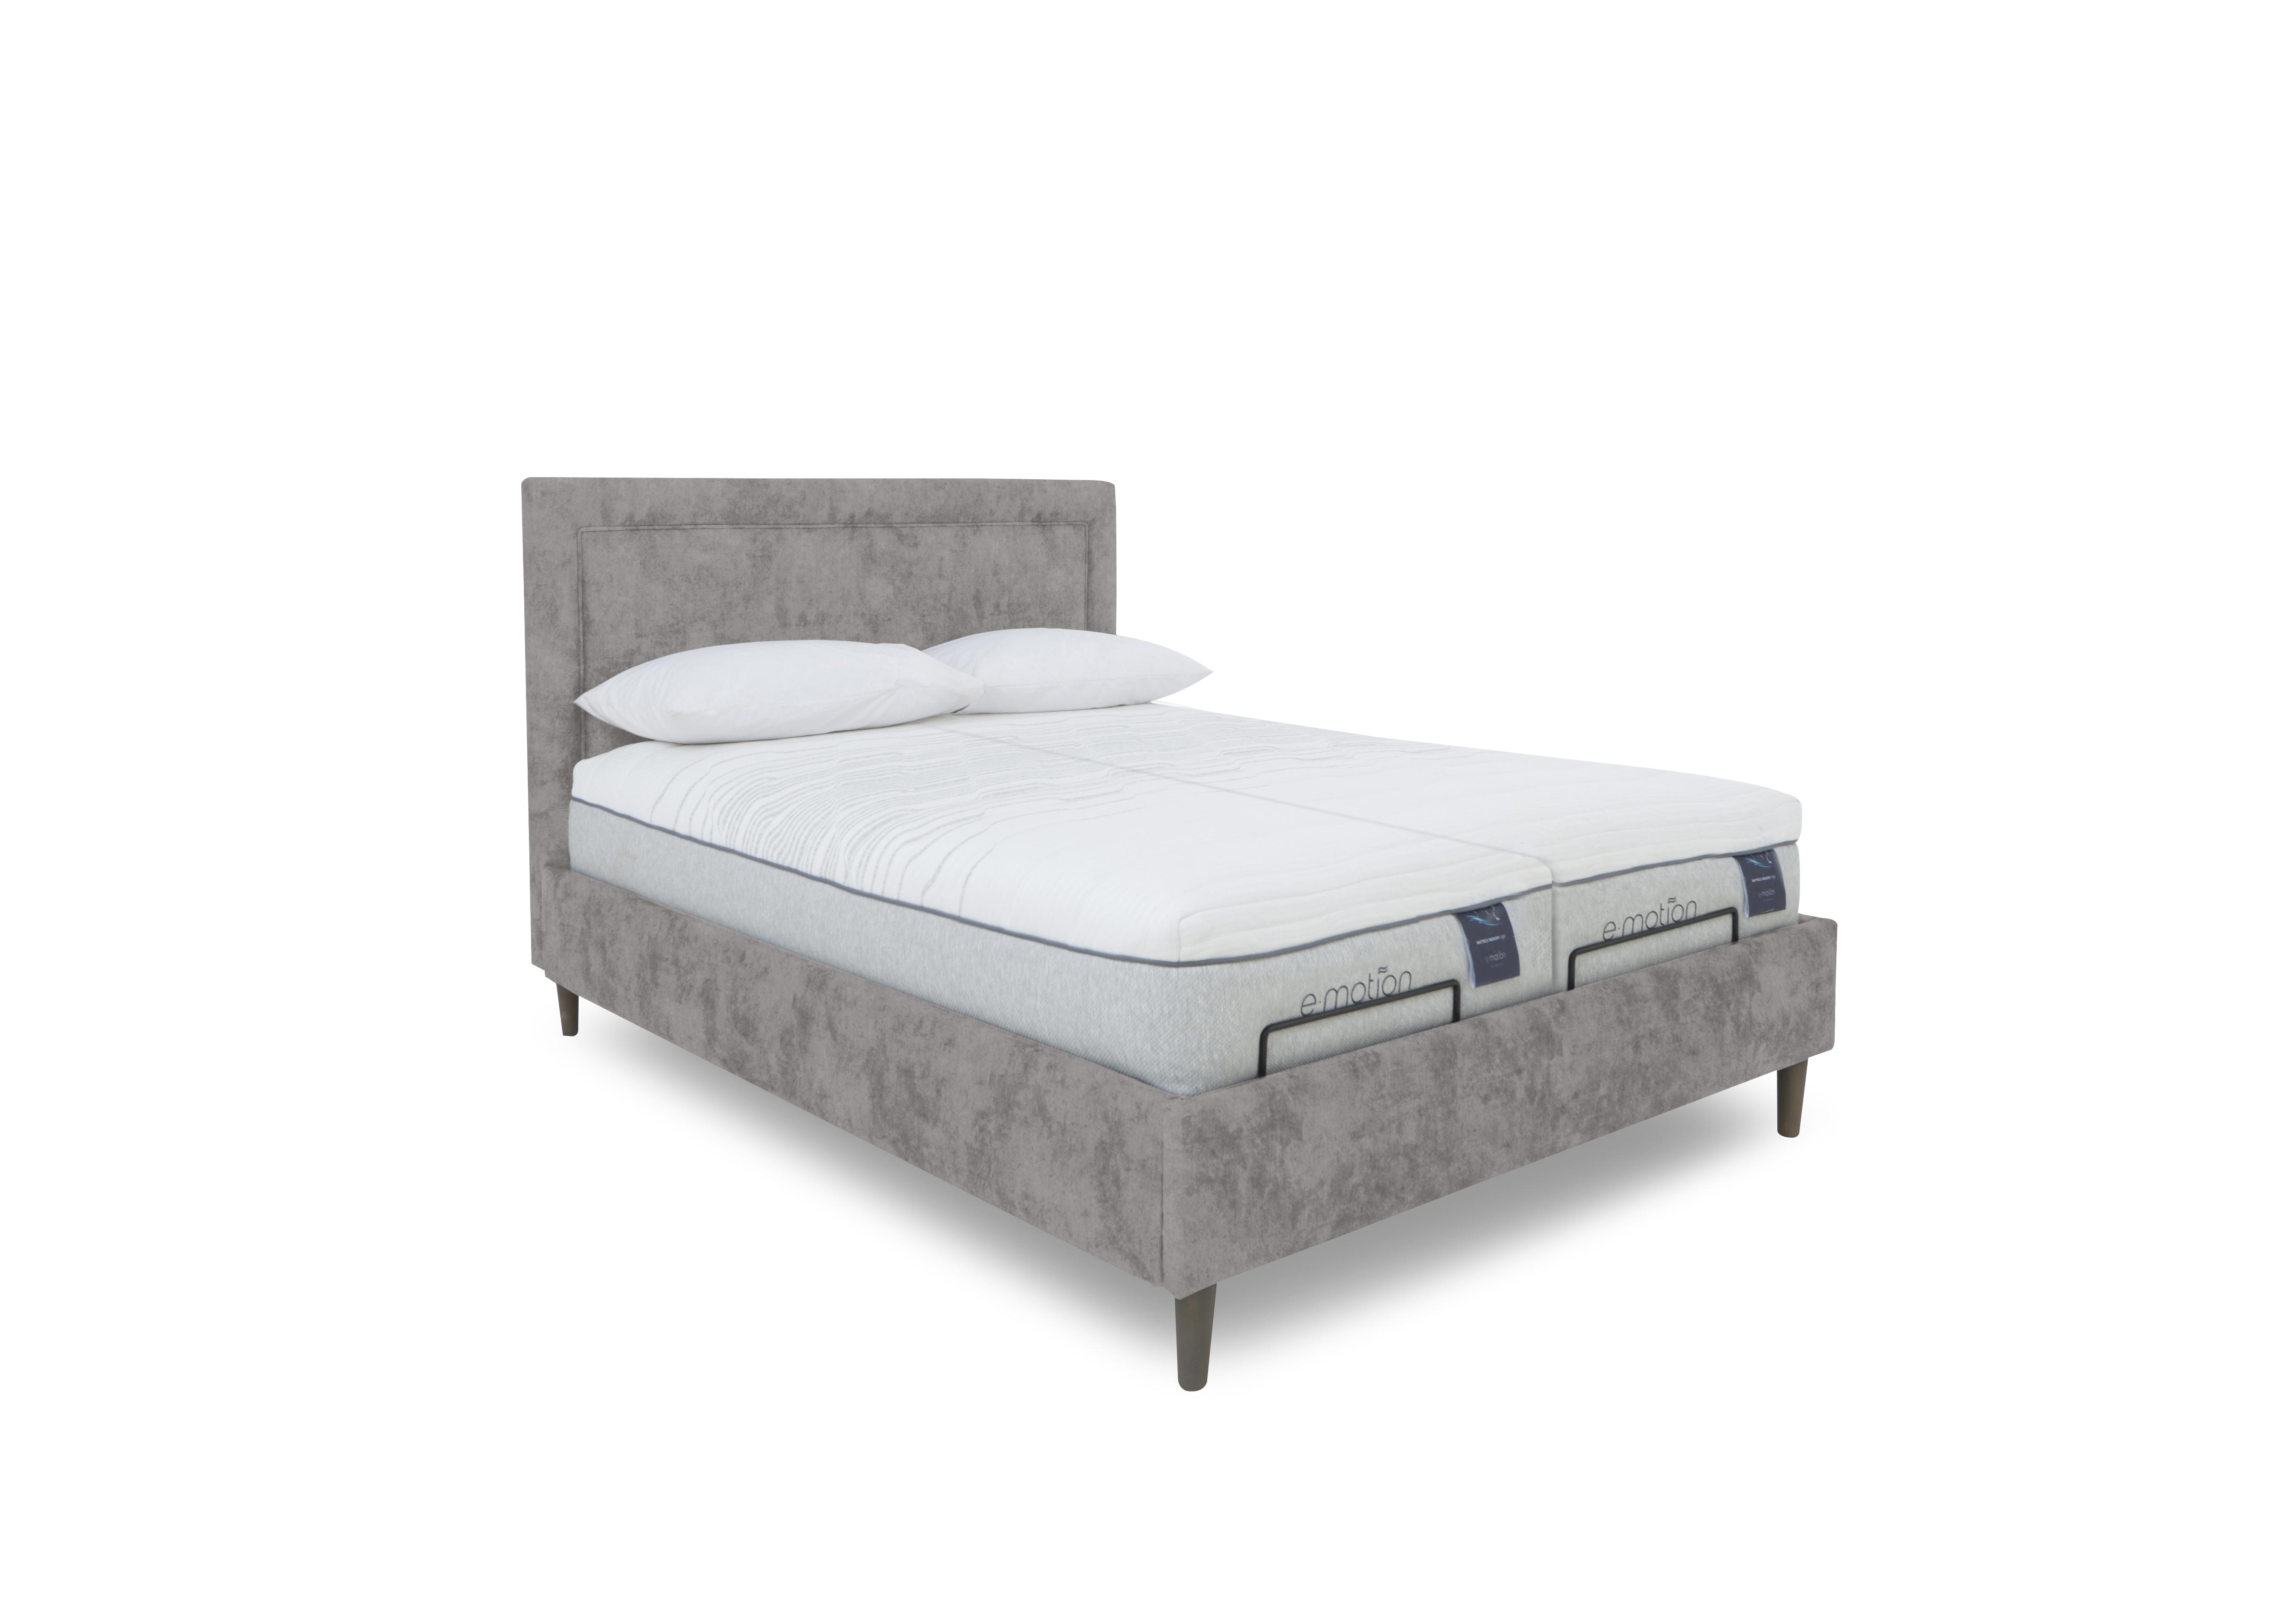 E-Motion Yumi Dual Adjustable Bed Frame with Massage Function in Daytona Silver on Furniture Village